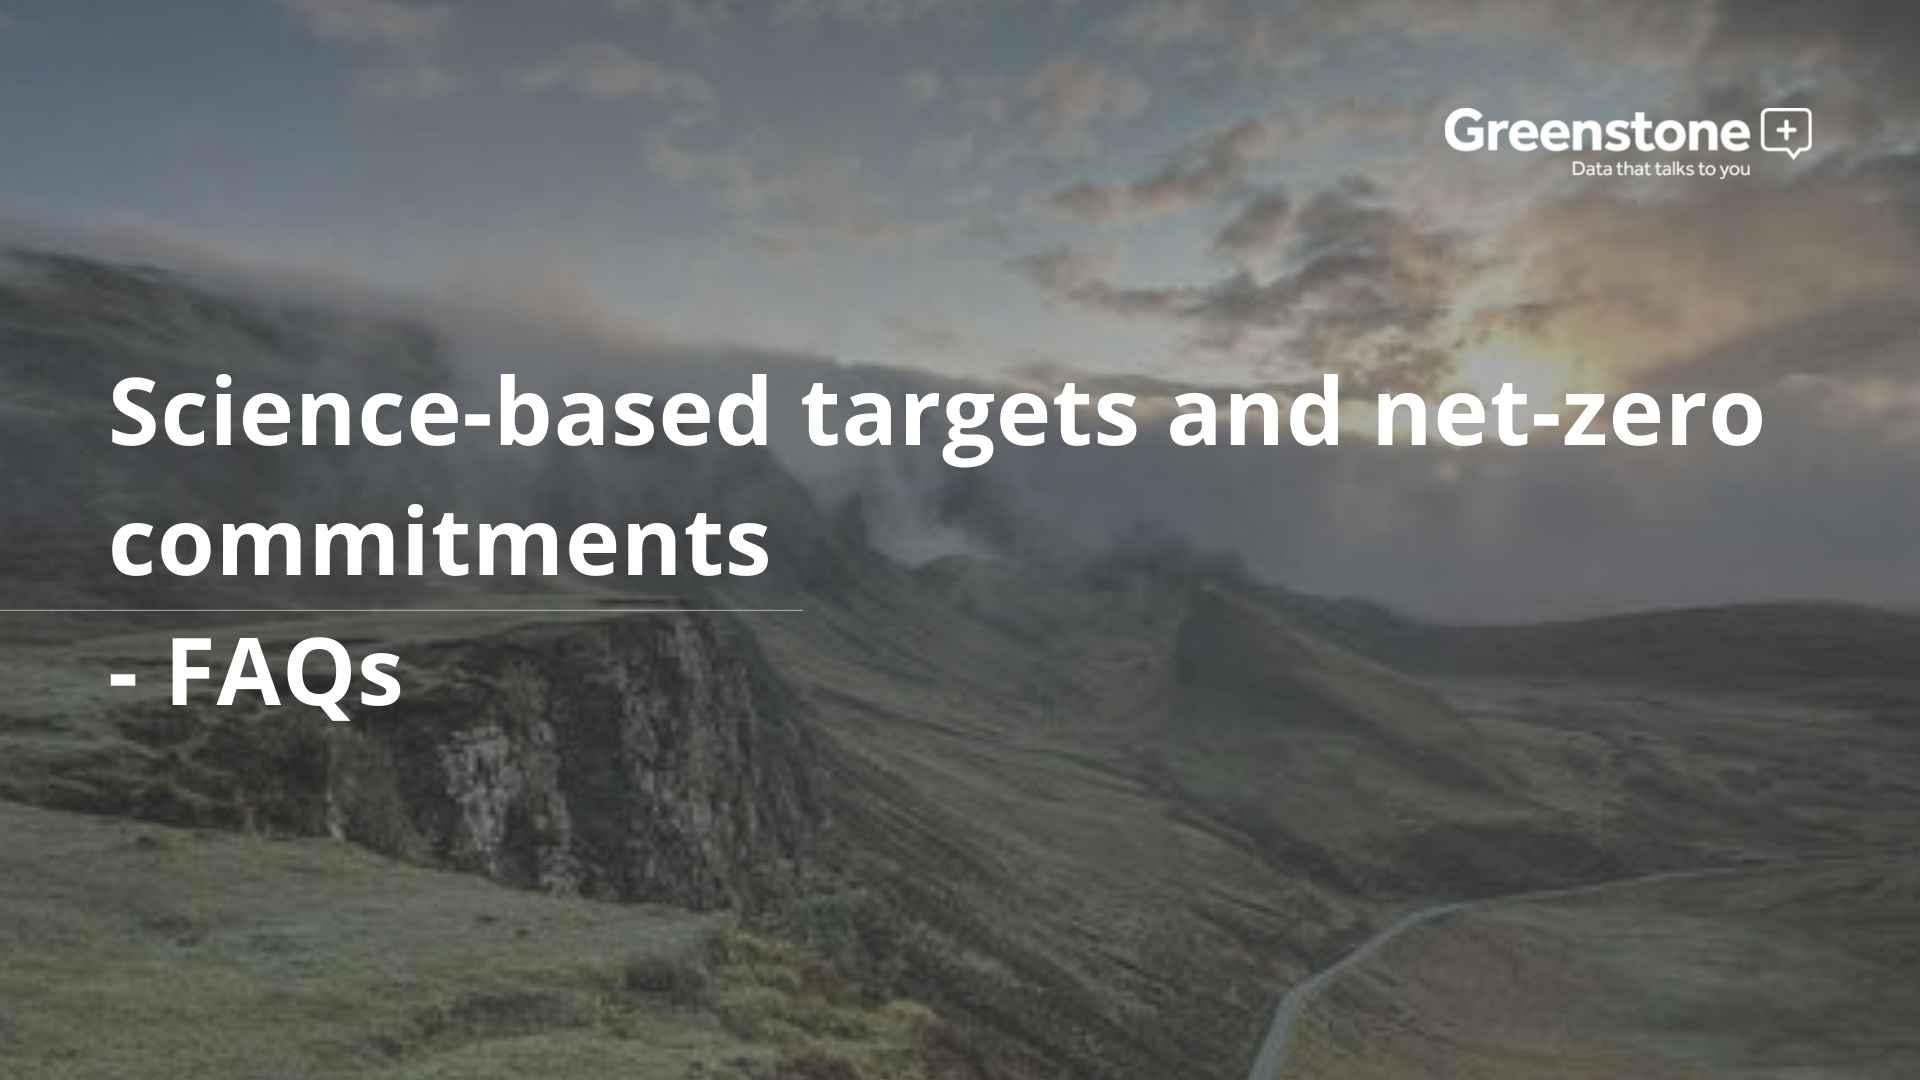 Science-based targets and net-zero commitments - FAQs